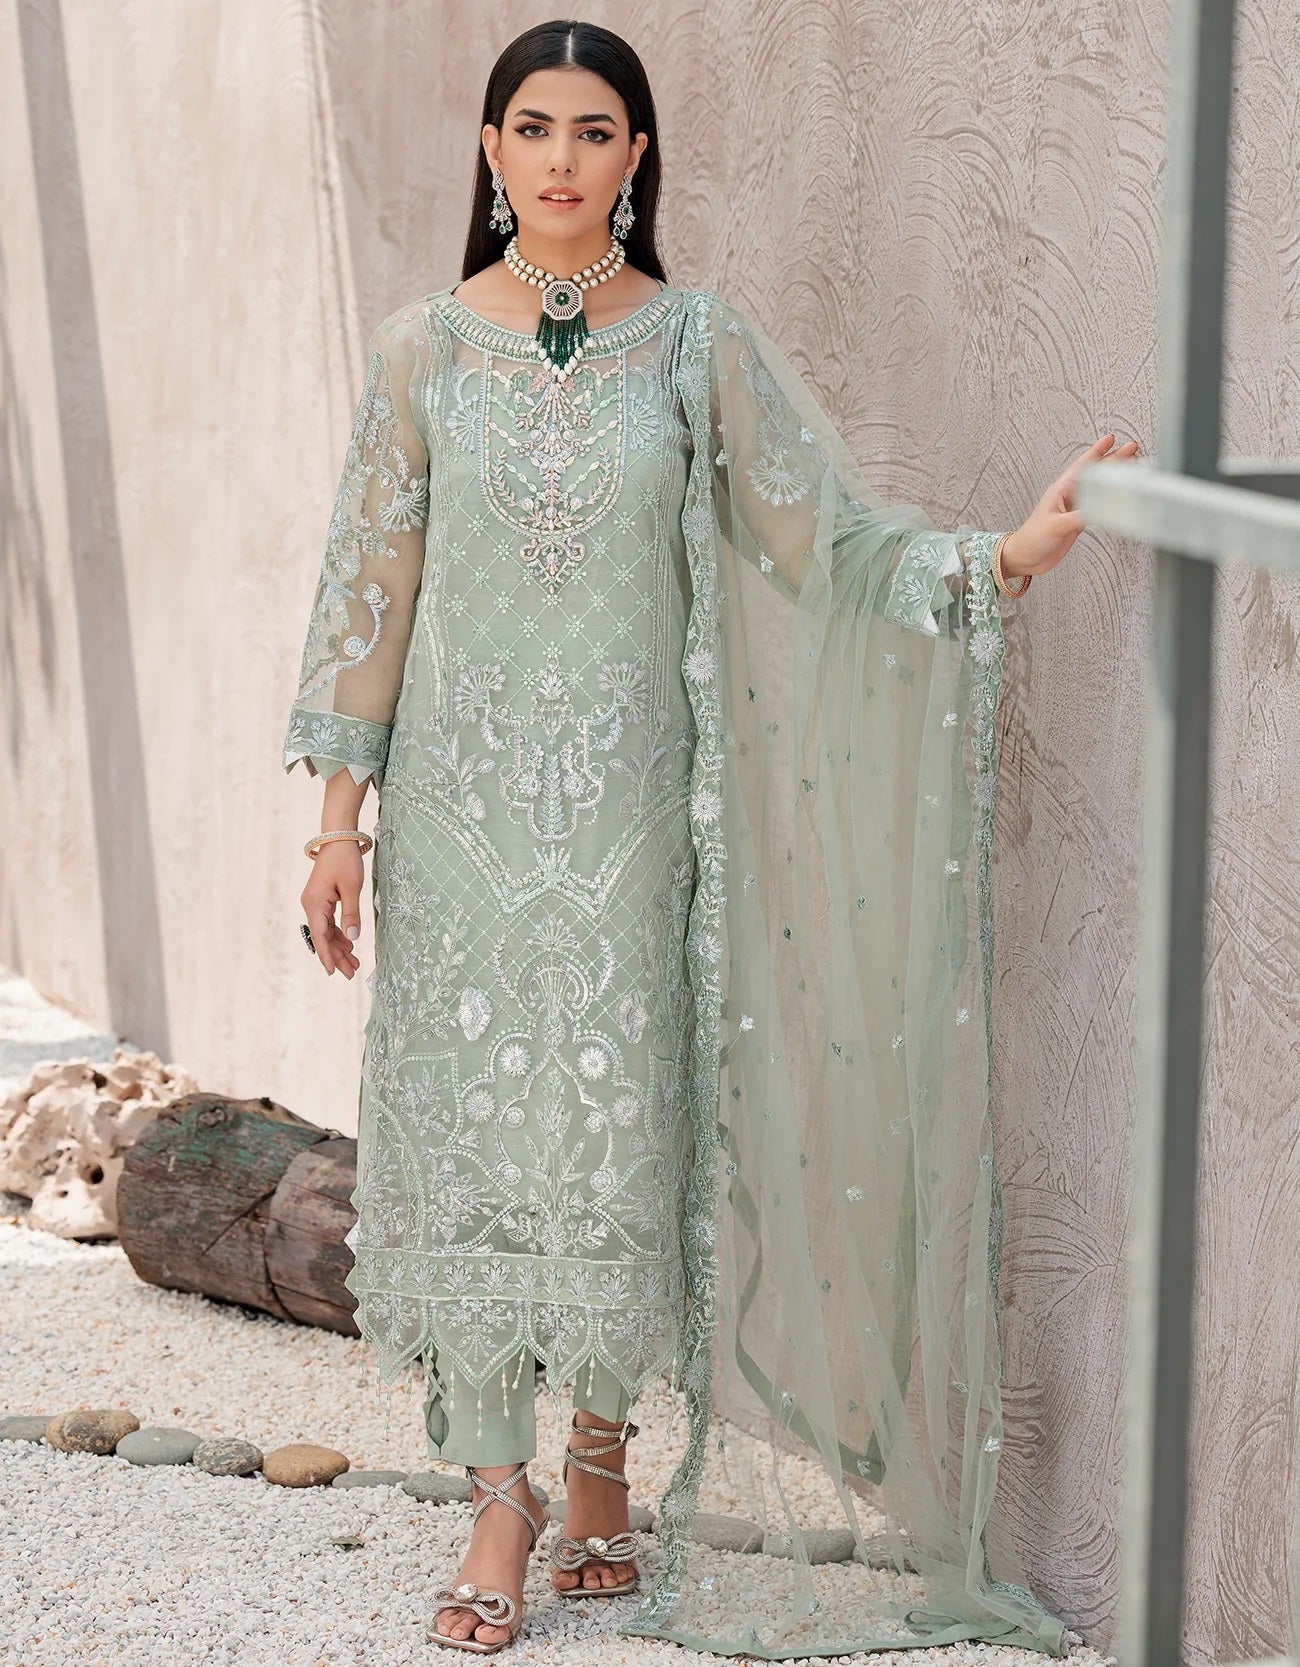 Nafasat By Emaan Adeel Embroidered Organza Suits Unstitched 3 Piece NF-07